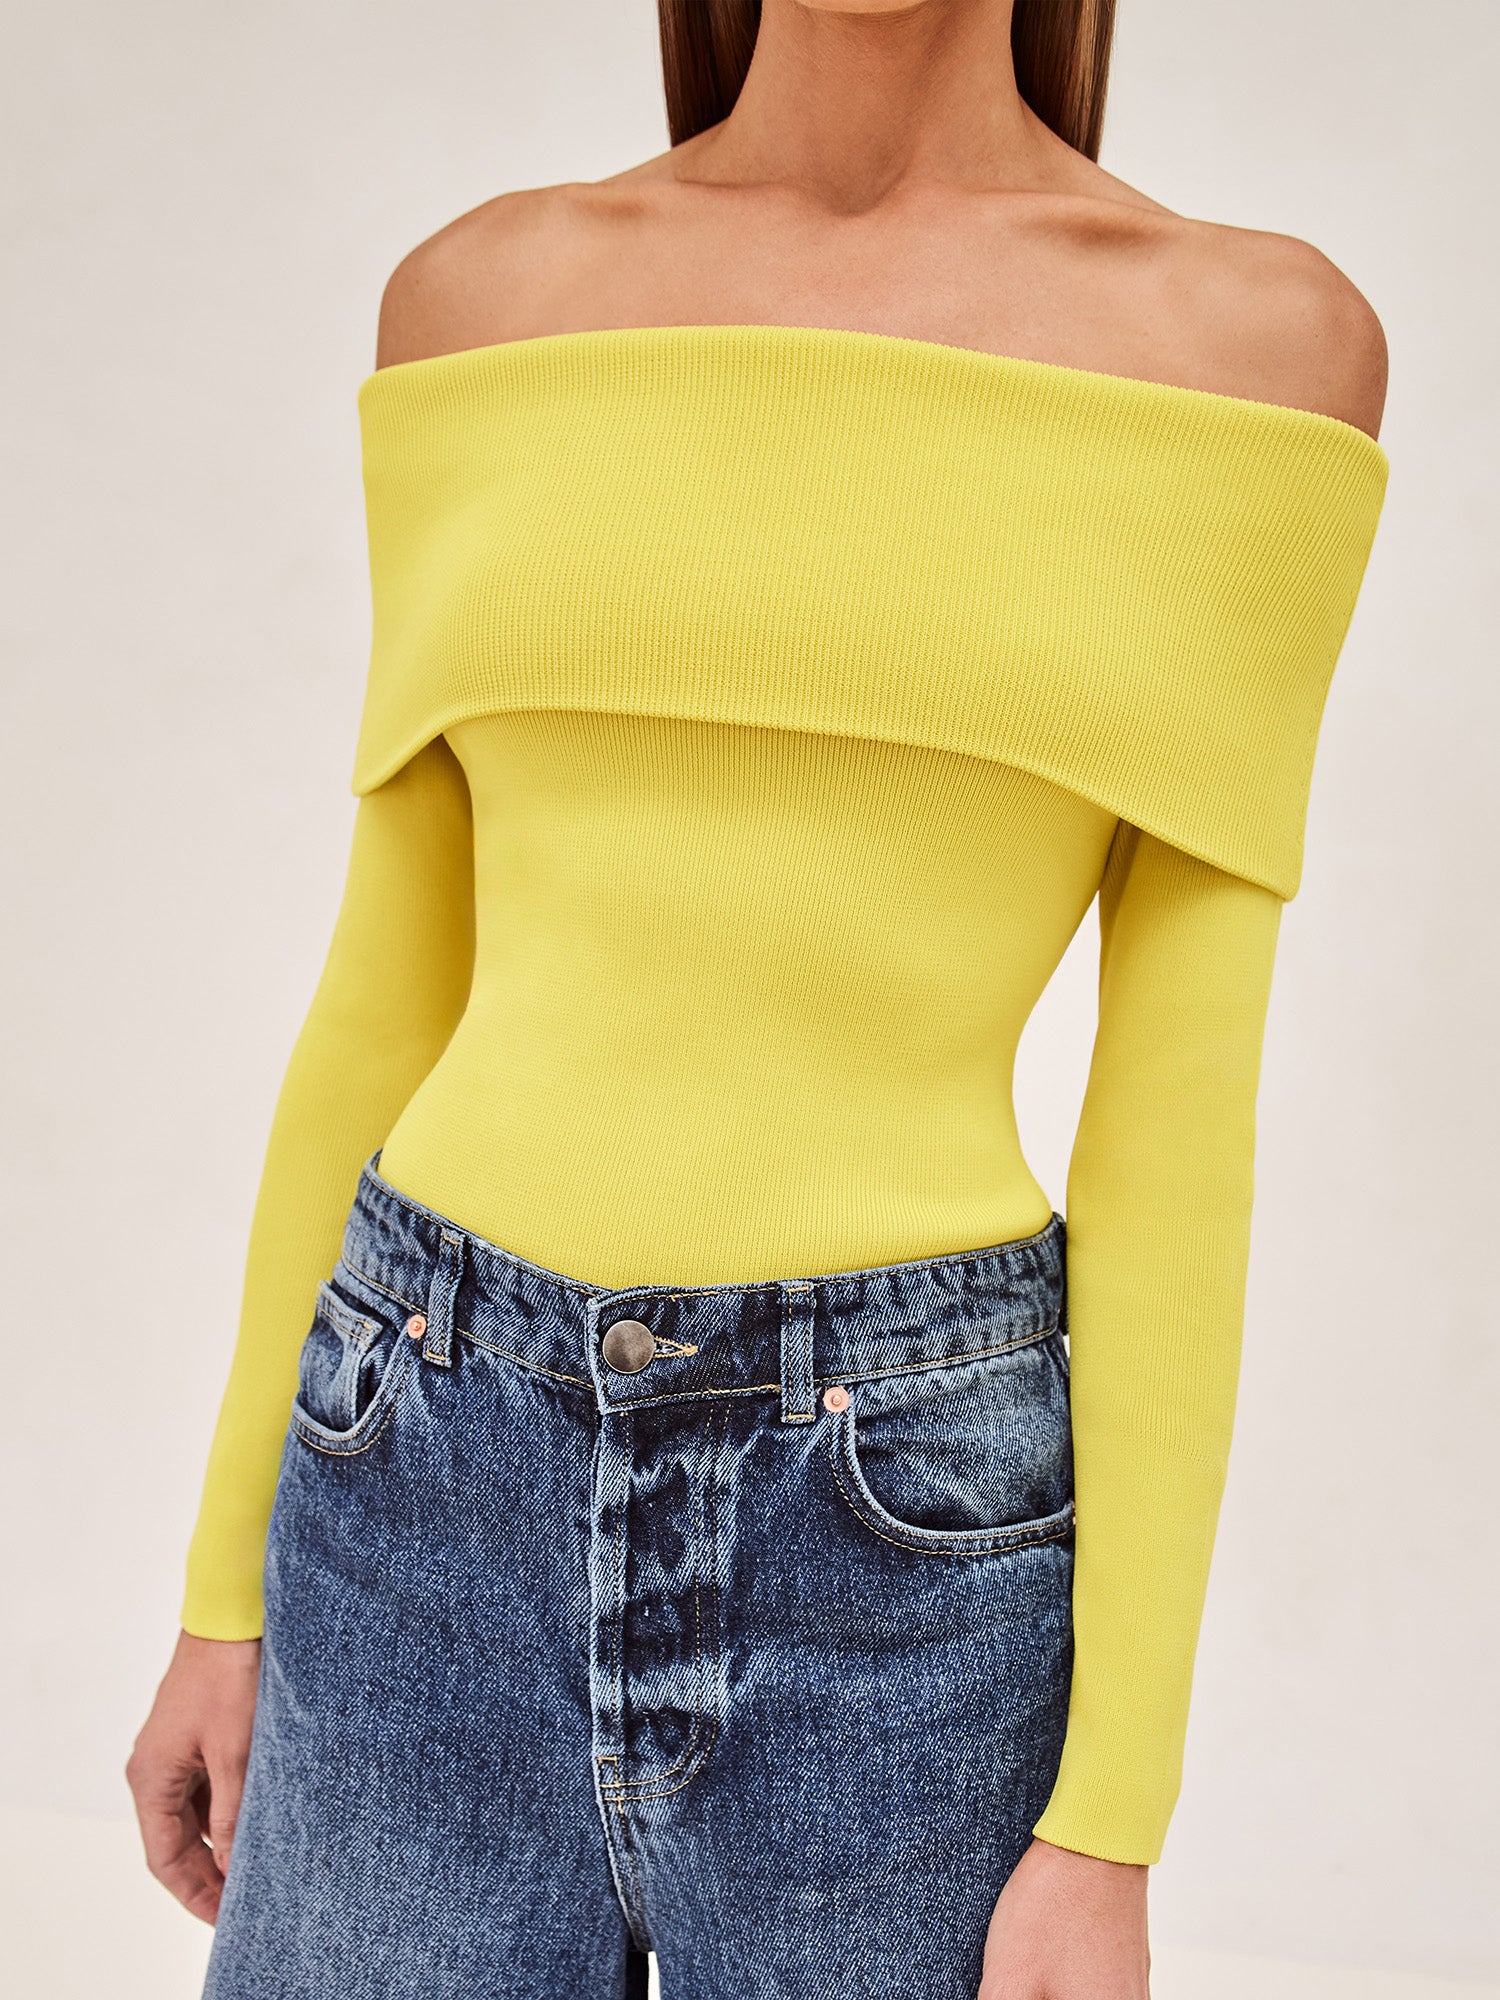 ALEXIS Amie off the shoulder long sleeve top in yellow